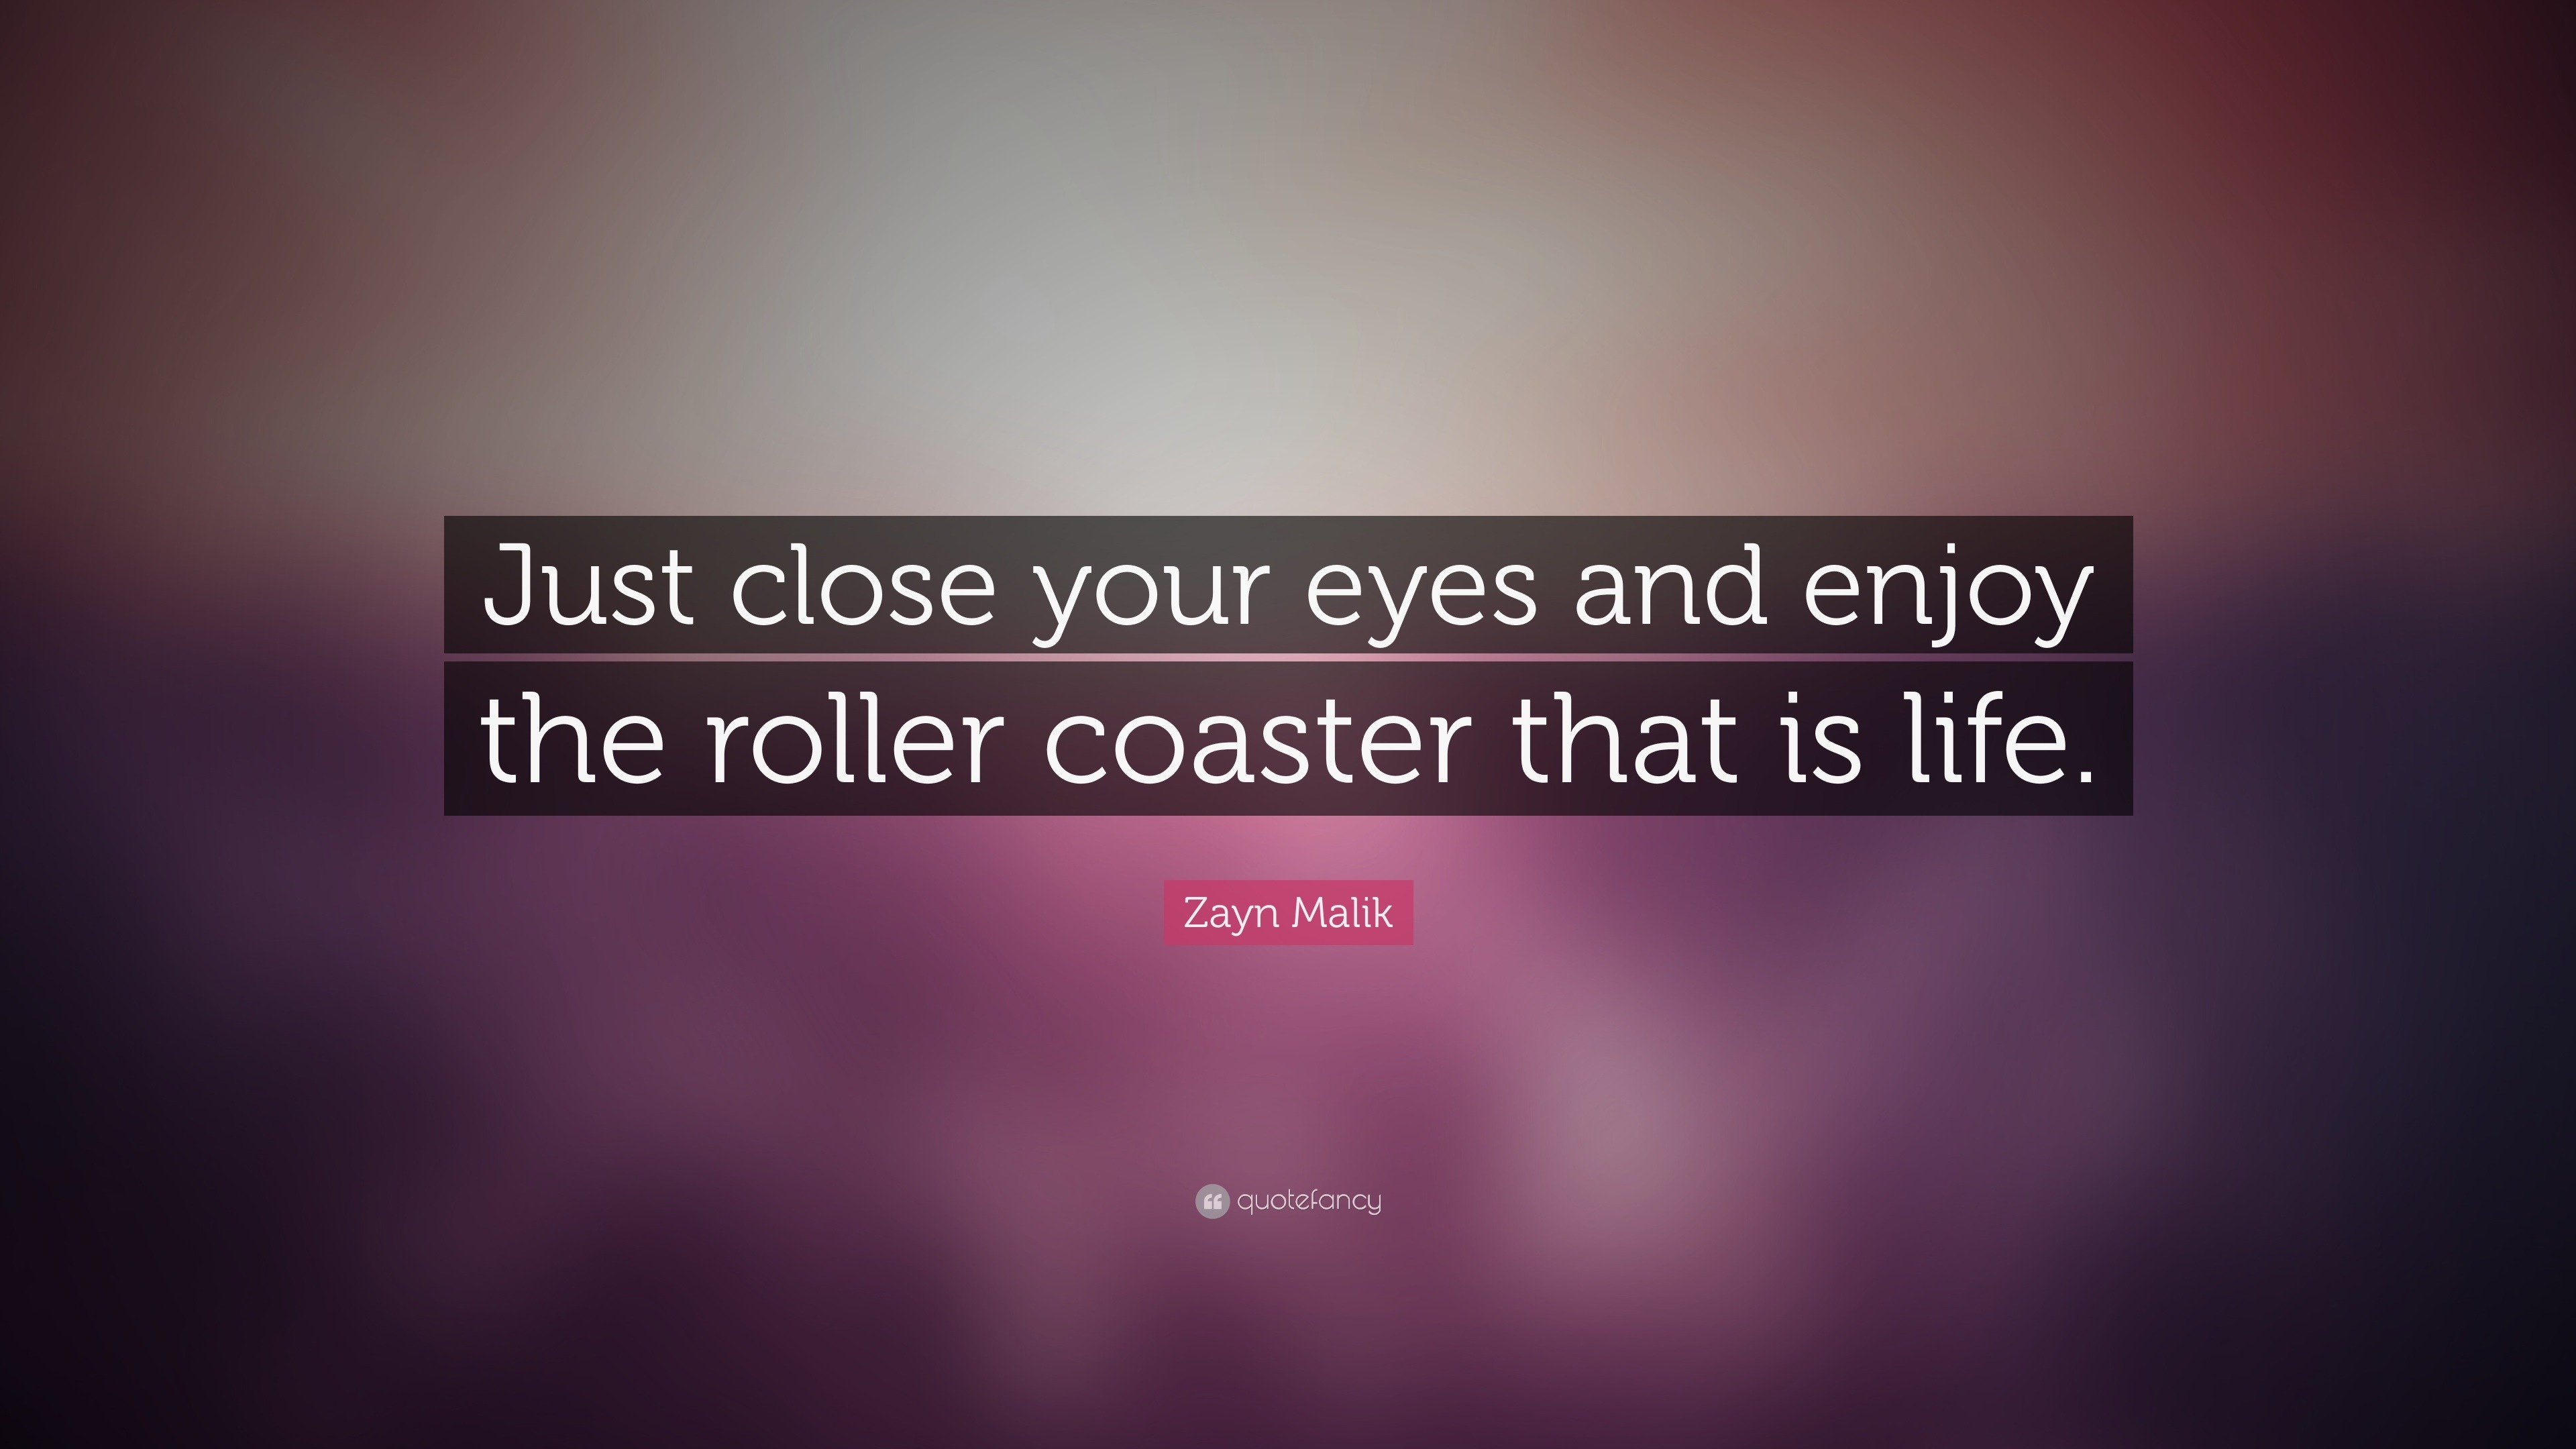 Zayn Malik Quote “Just close your eyes and enjoy the roller coaster that is